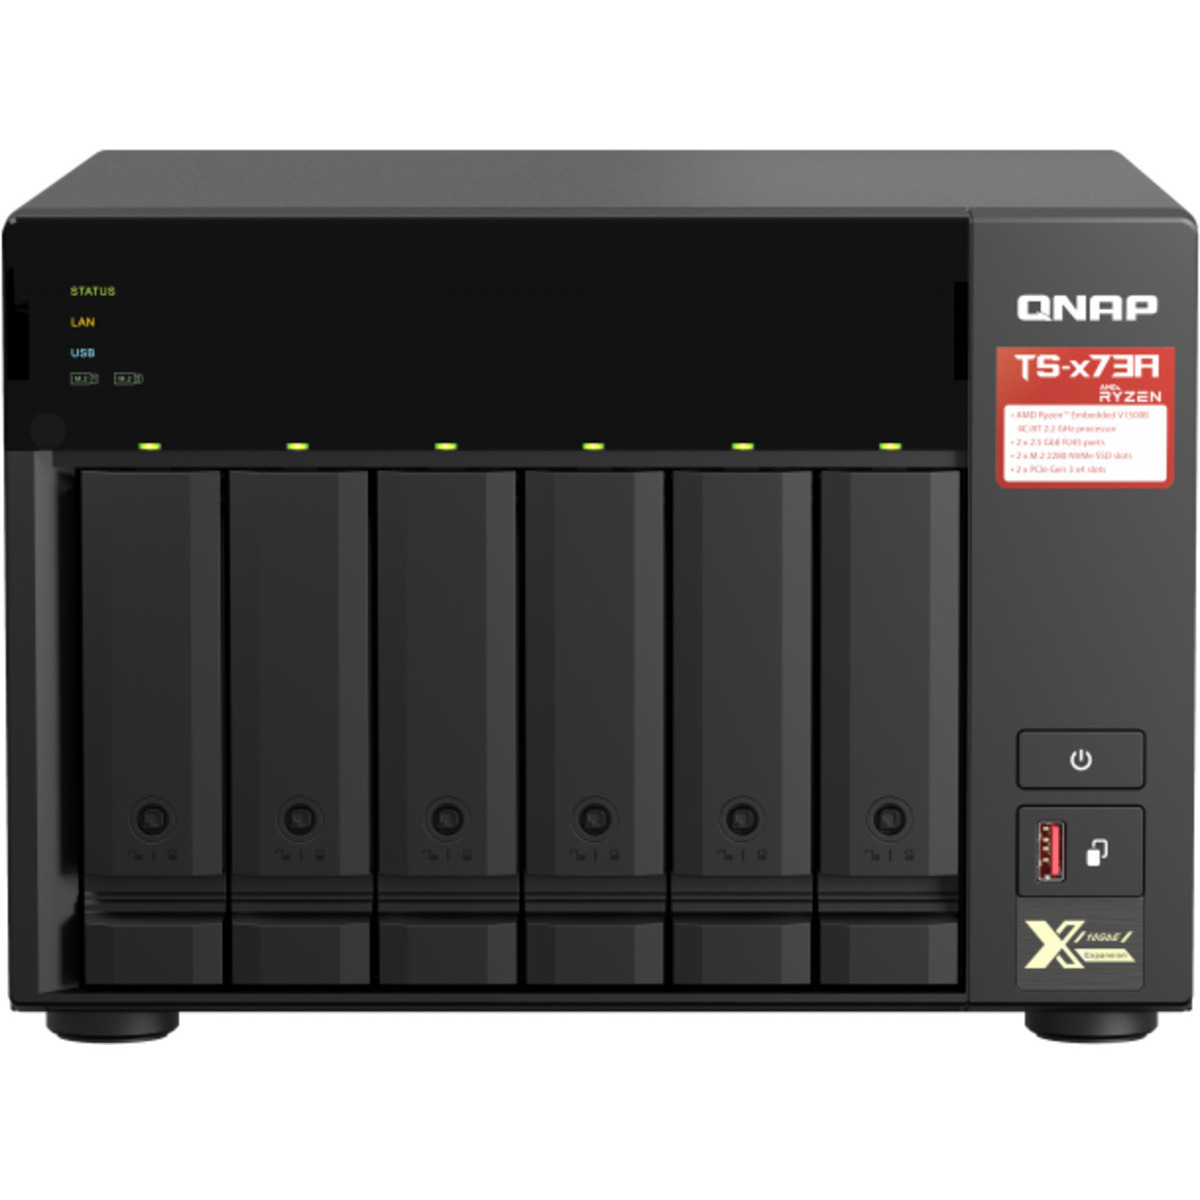 QNAP TS-673A 96tb 6-Bay Desktop Multimedia / Power User / Business NAS - Network Attached Storage Device 6x16tb Seagate EXOS X18 ST16000NM000J 3.5 7200rpm SATA 6Gb/s HDD ENTERPRISE Class Drives Installed - Burn-In Tested TS-673A